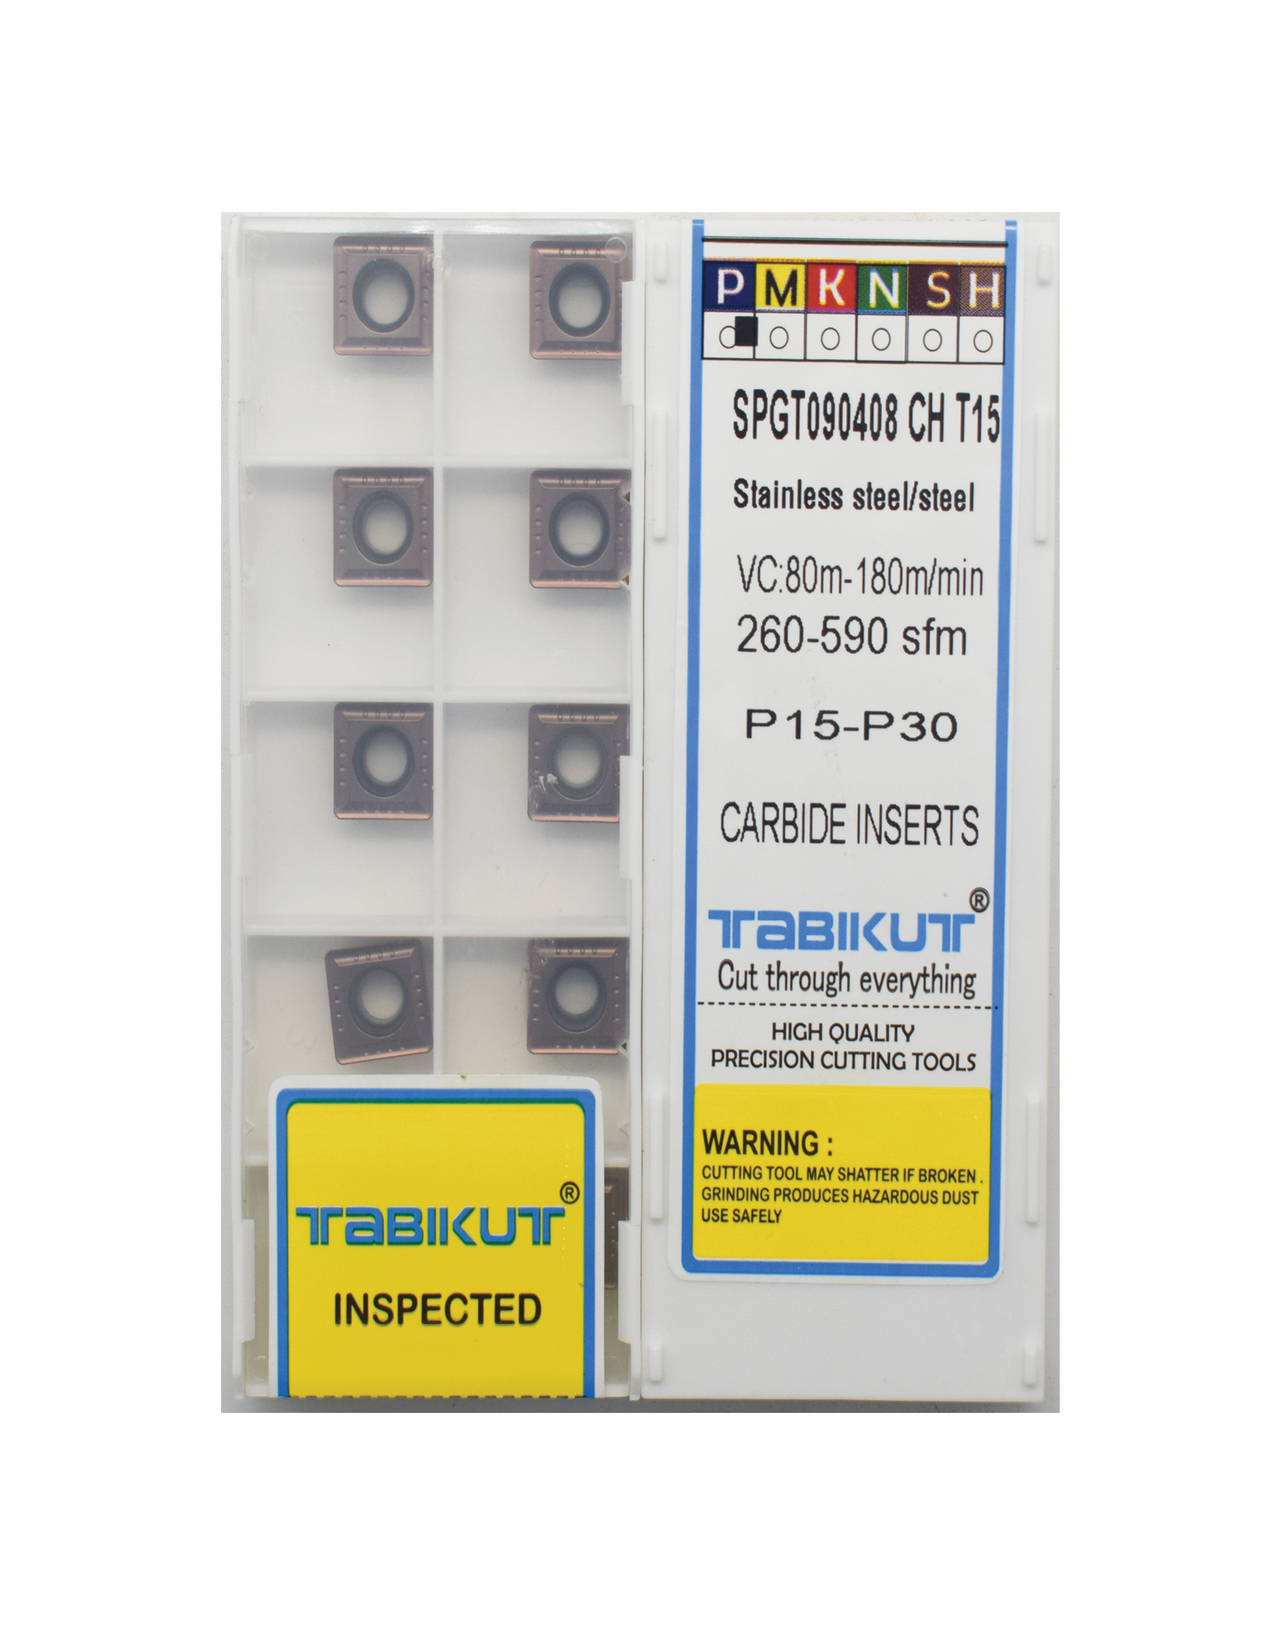 SPGT090408 CH T15 drilling insert for ss and steel grade pack of 10